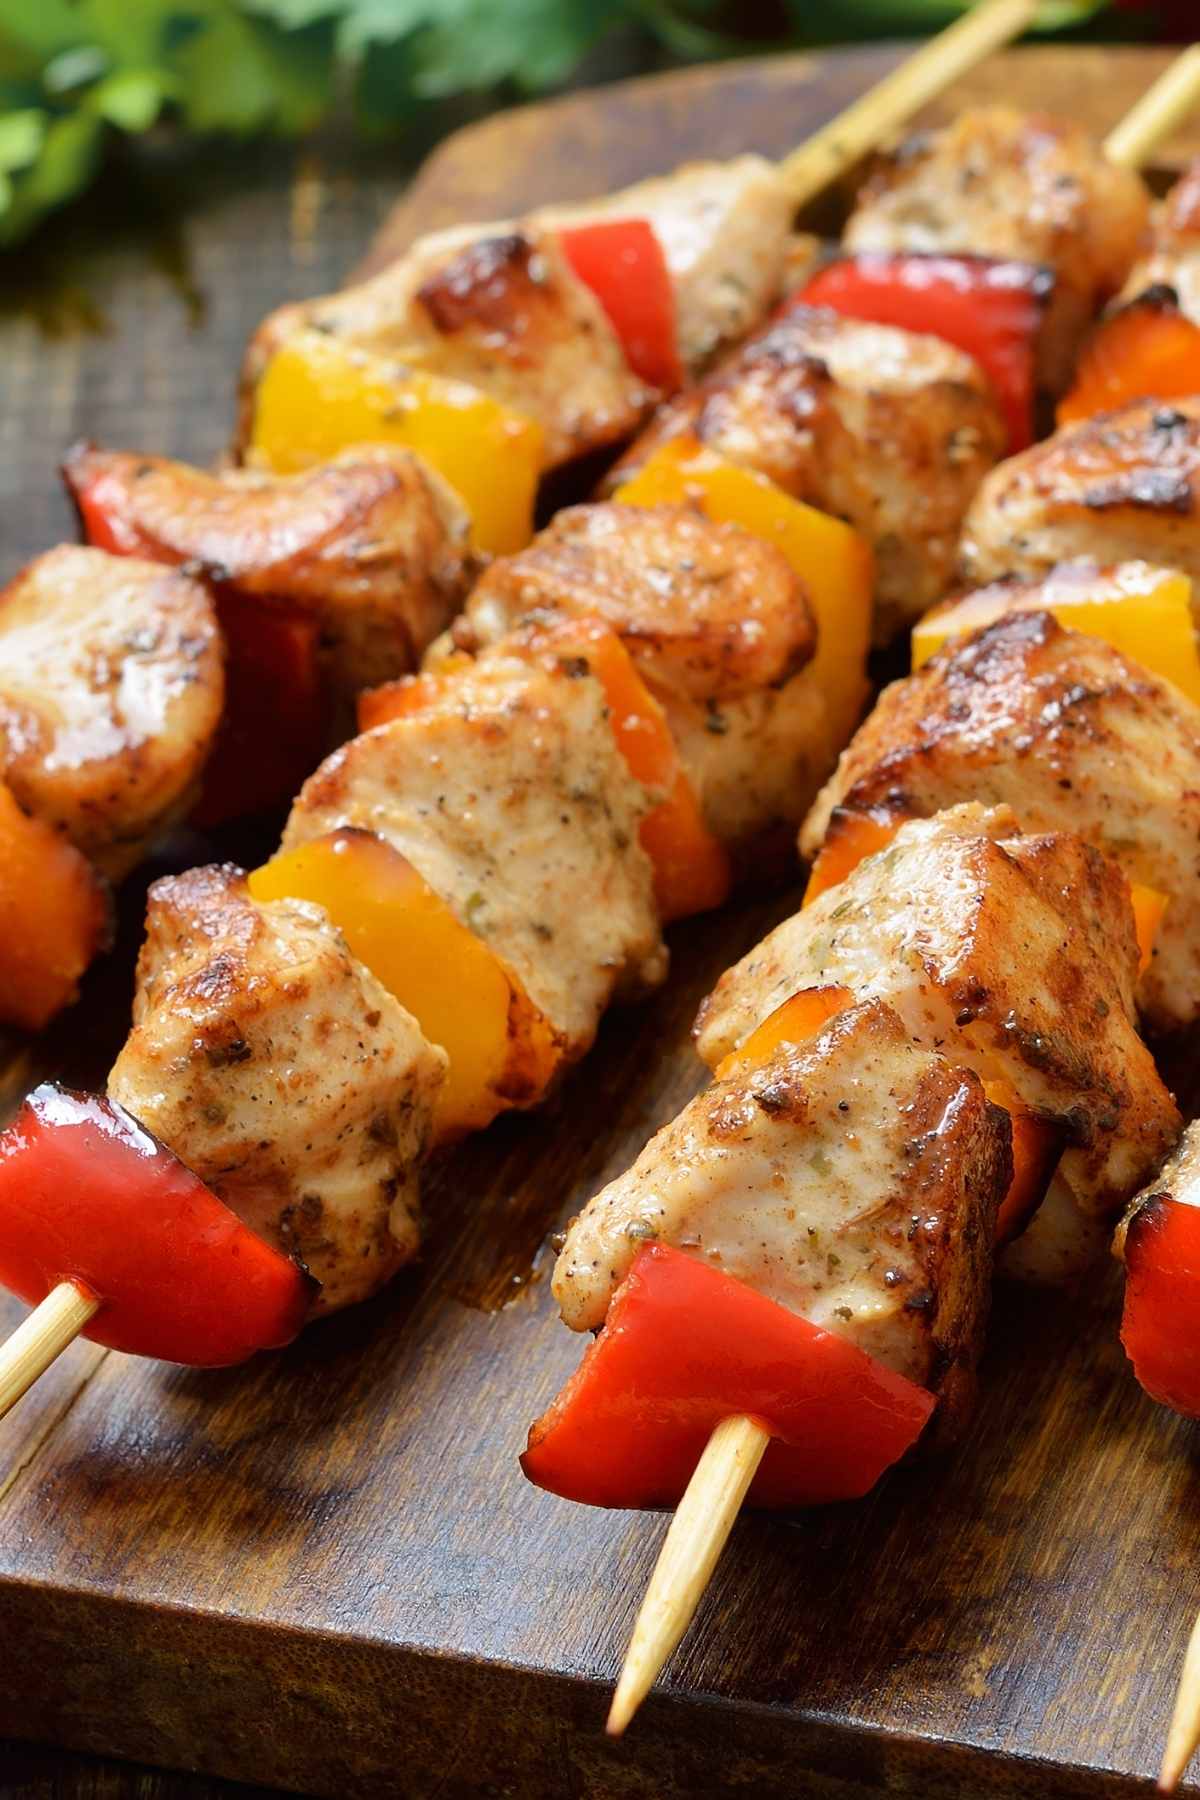 When the weather is warm, it’s always fun to have a meal outside on the backyard deck. One dish that’s easy to make and always gets rave reviews is Grilled Chicken on a Stick. It’s quick, tasty, and pairs well with salads, rice, or potatoes!